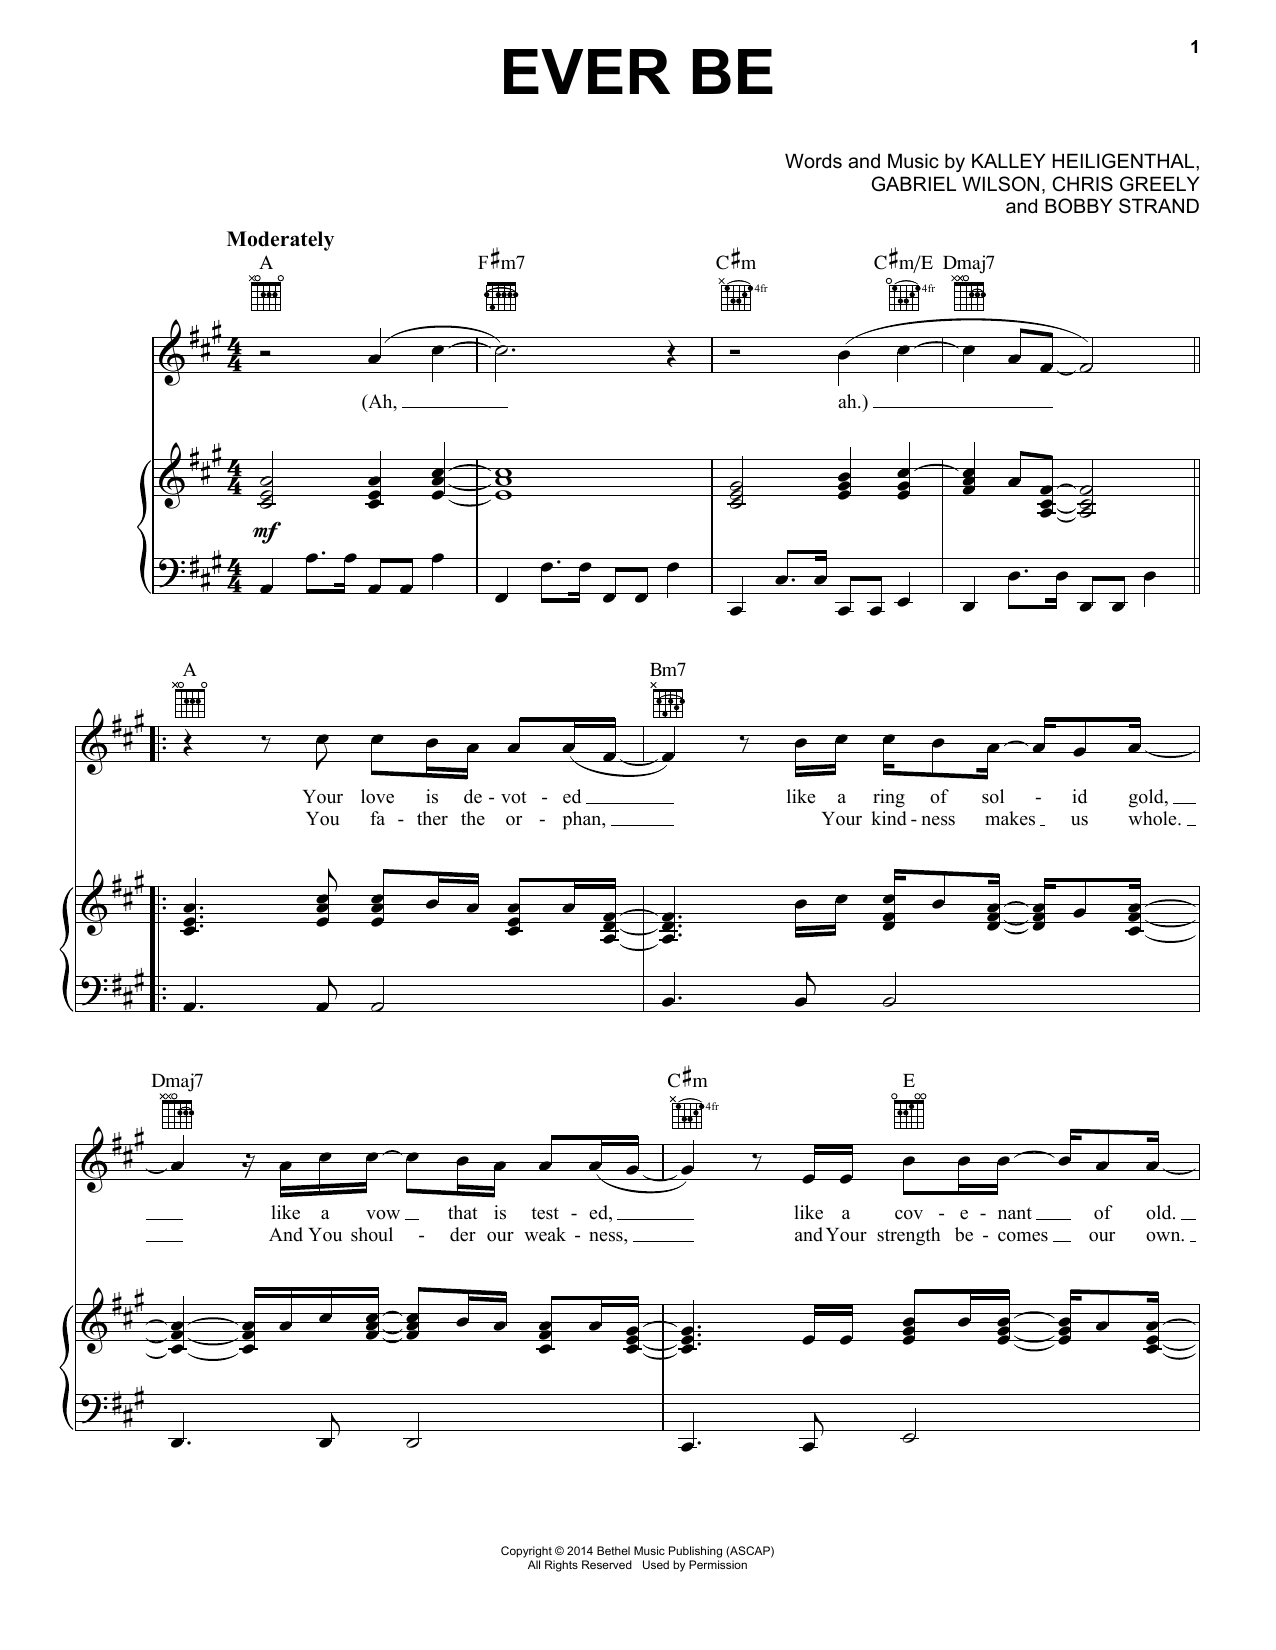 Bethel Music Ever Be sheet music notes and chords. Download Printable PDF.